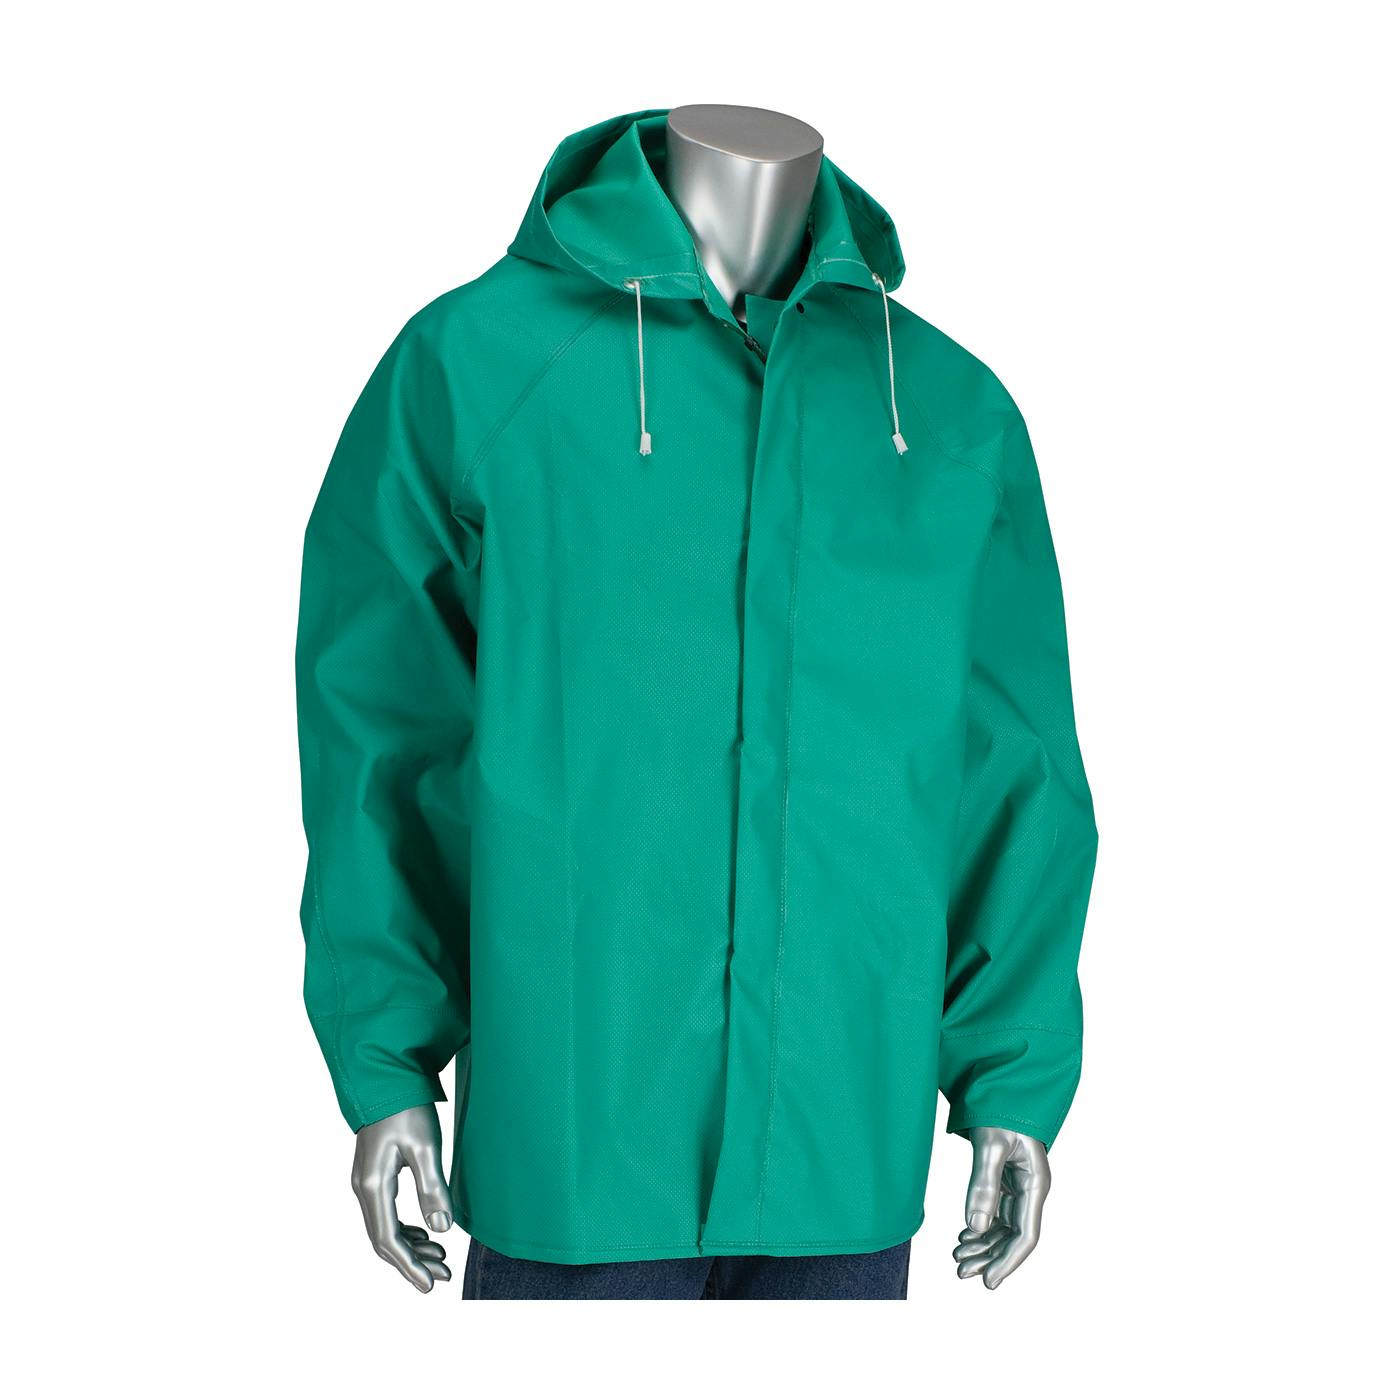 Treated PVC Jacket with Hood - 0.42 mm, Green (205-420JH)